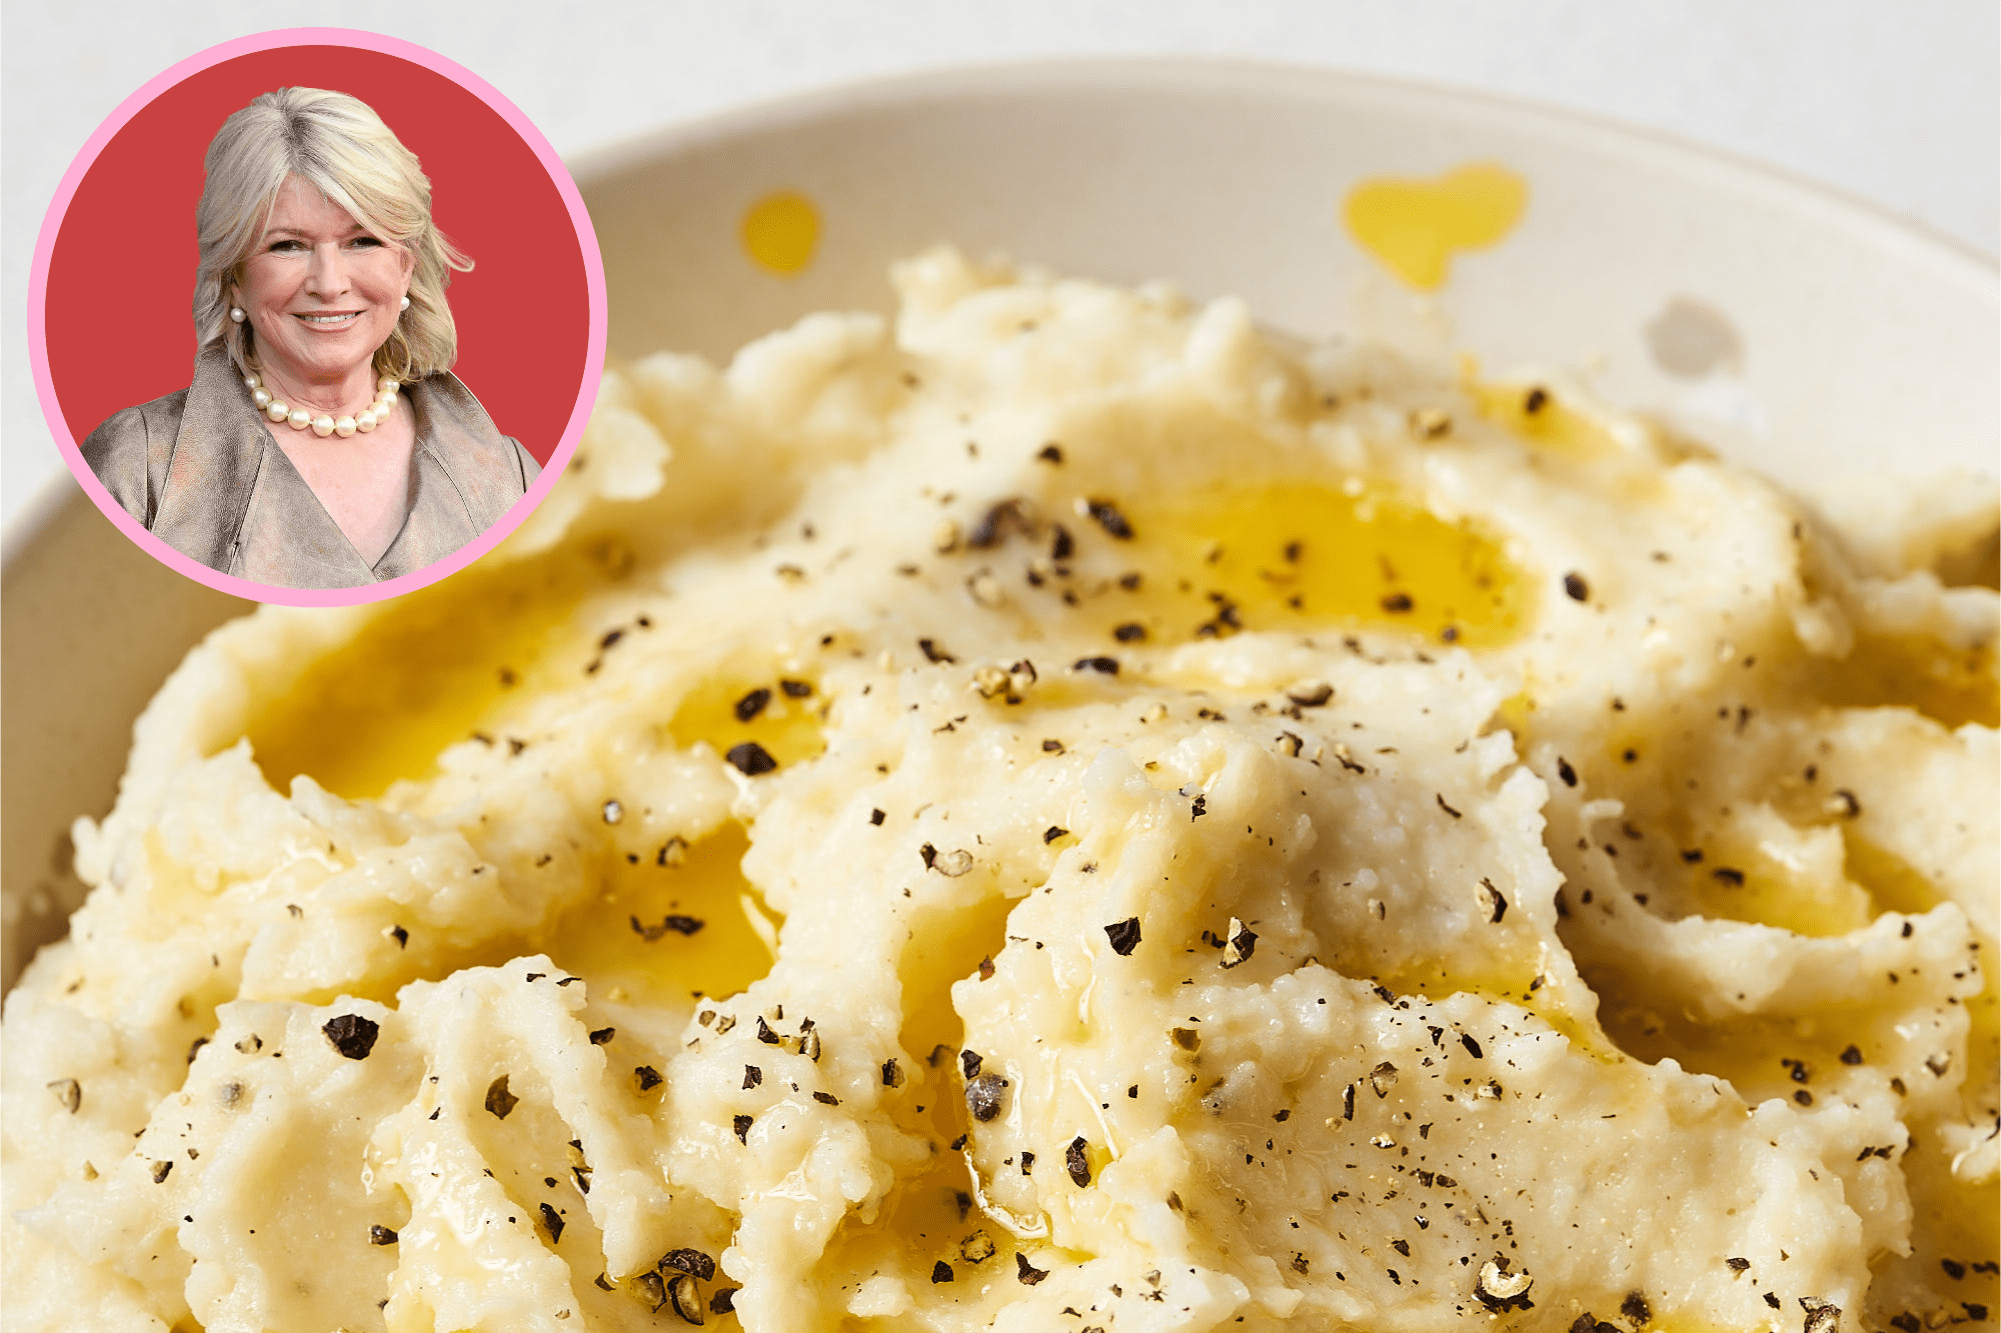 Testing Ree Drummond's Kitchen Hacks: Mashed Potatoes in a Stand Mixer